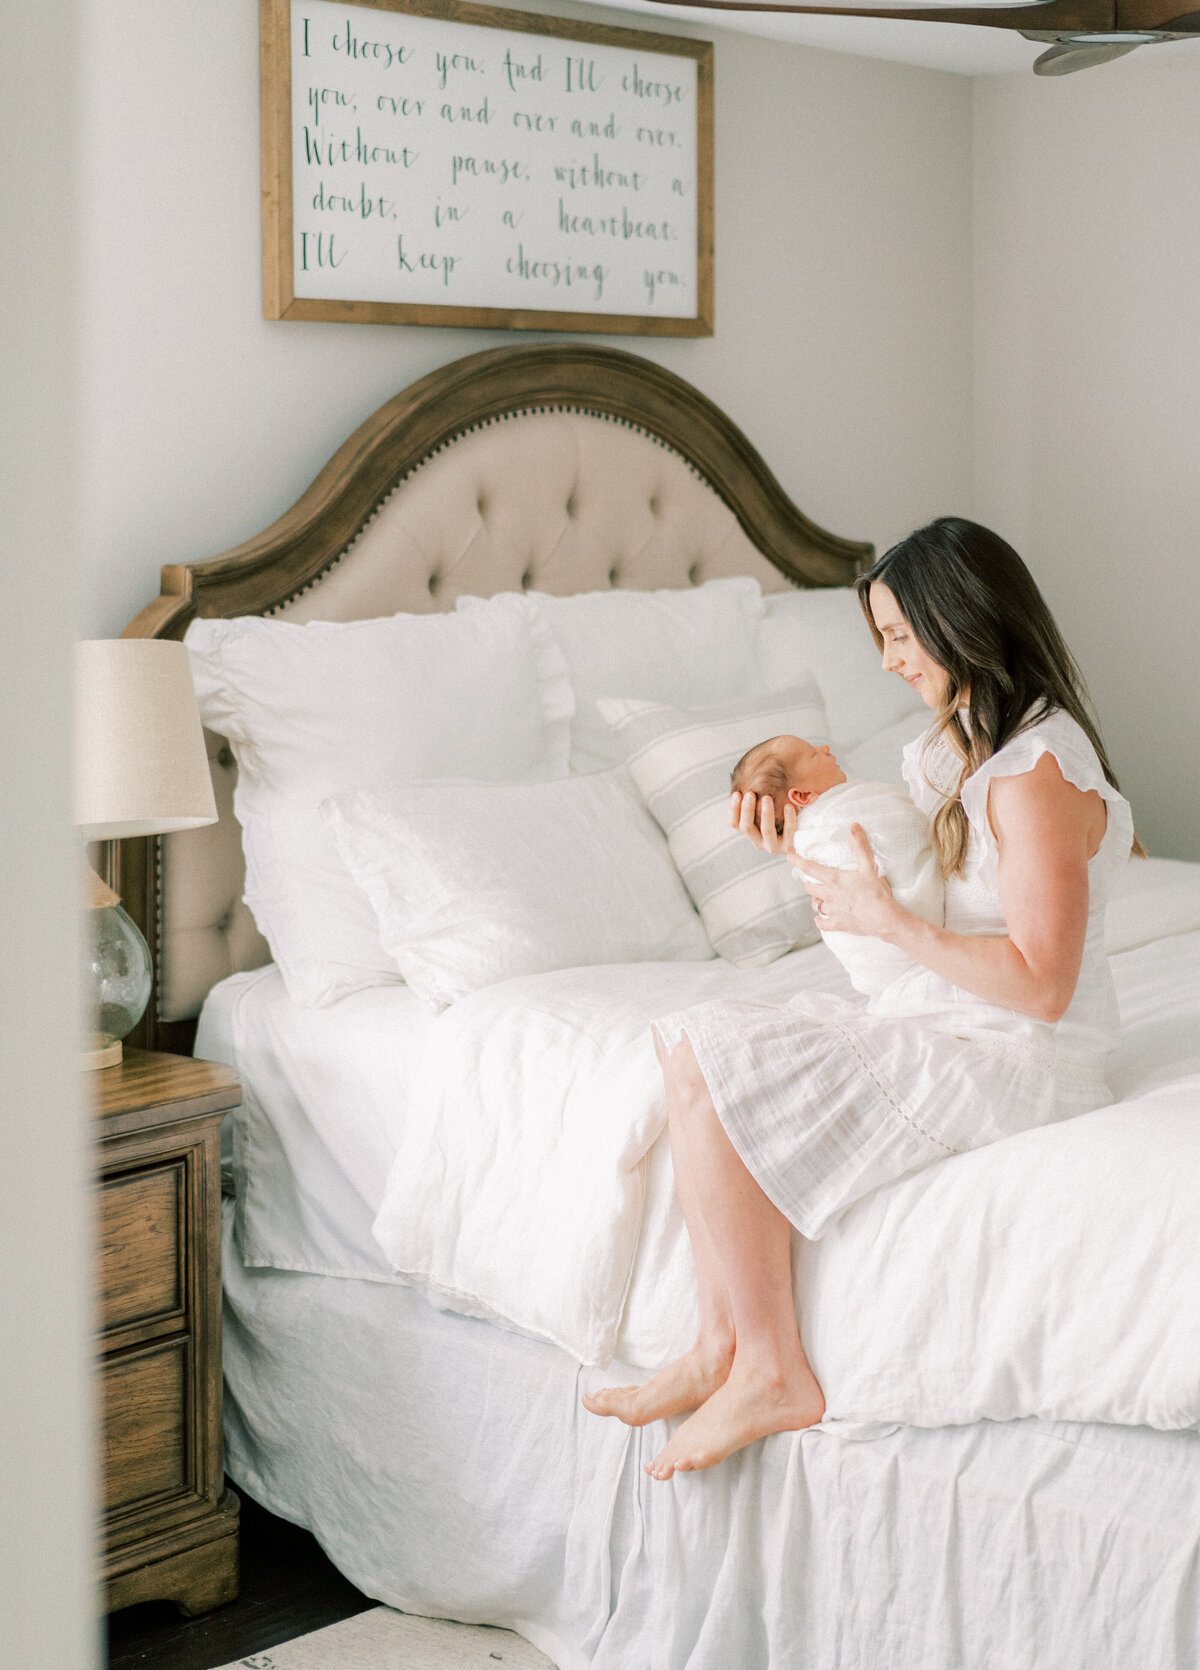 Portrait of a woman wearing a white dress sitting holding a swaddled baby in her bed room